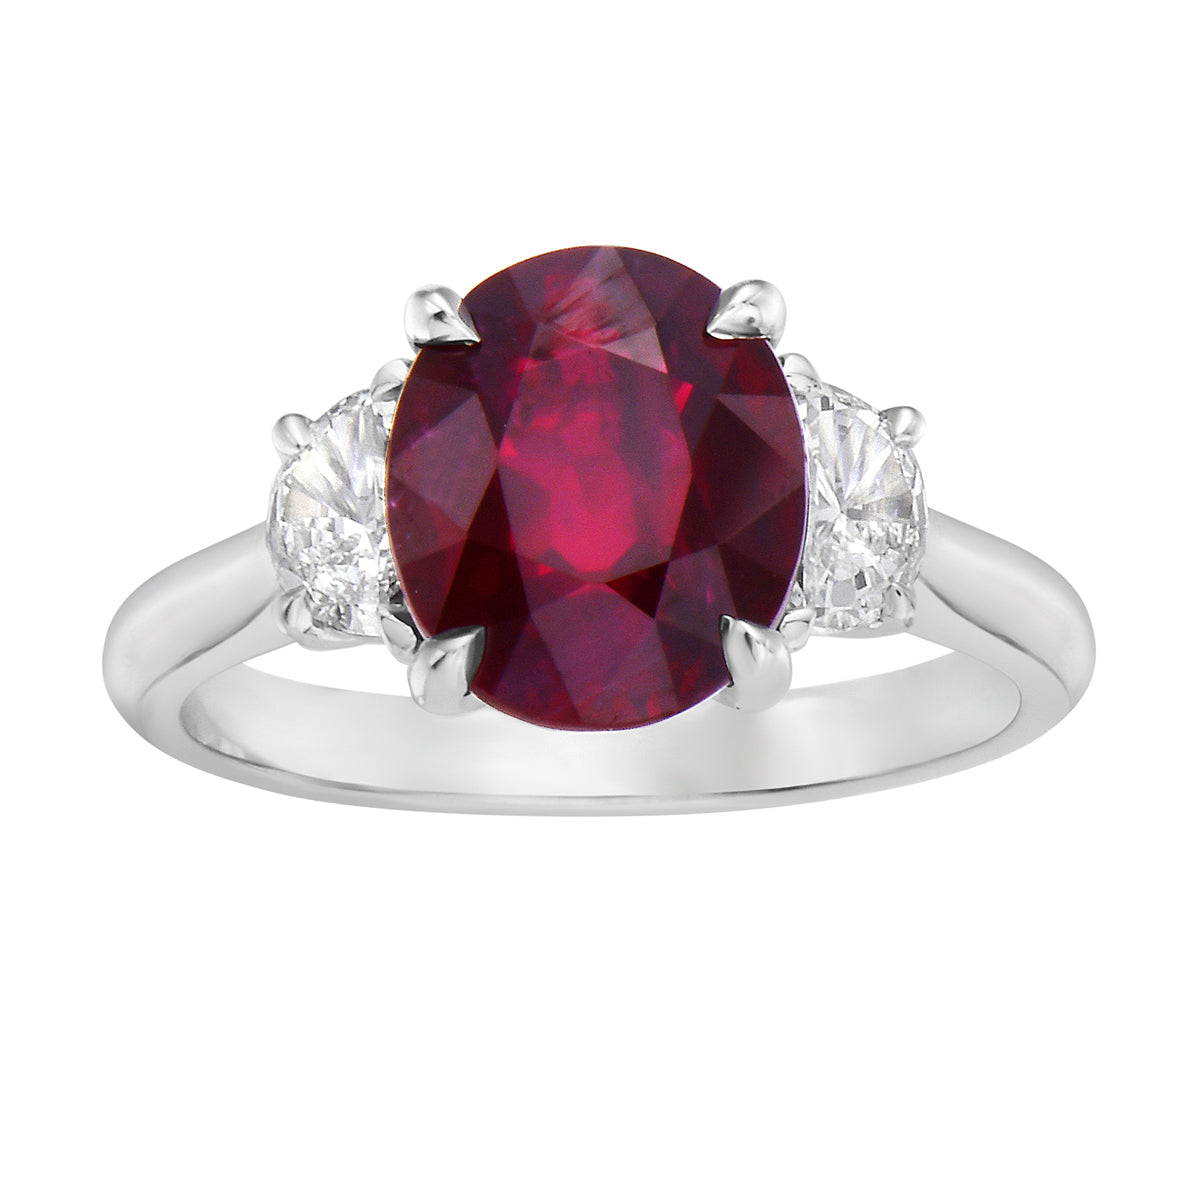 Ring 18KW 1RUBY-4.42CT 2HM-0.44CT GIA6224516349